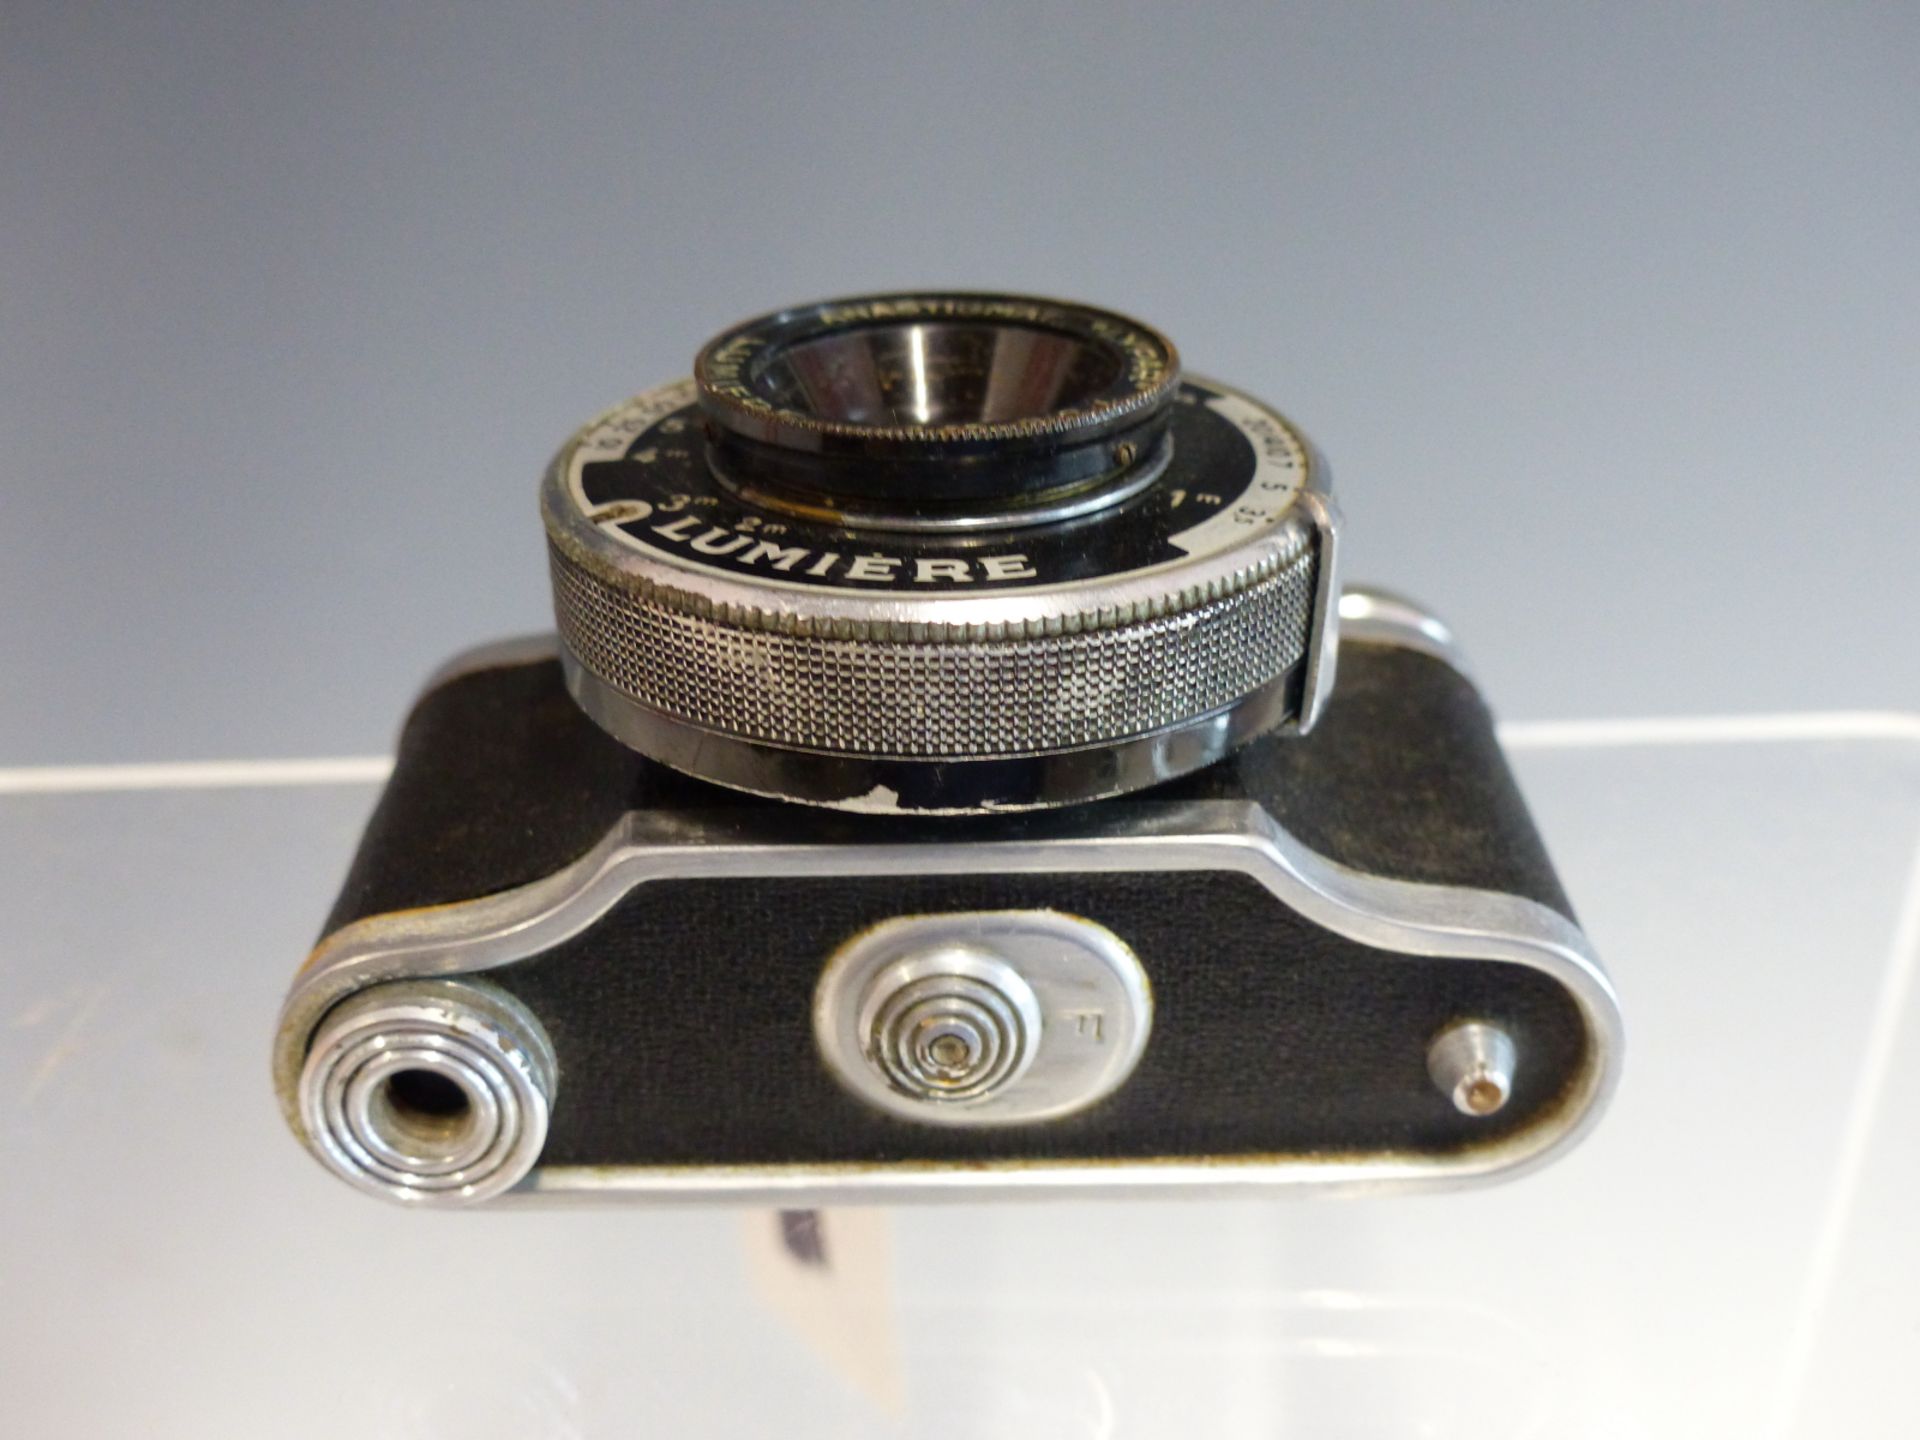 A VINTAGE ELJY LUMIERE MINIATURE ROLL FILM CAMERA WITH "LYPAR" LENS. - Image 3 of 4